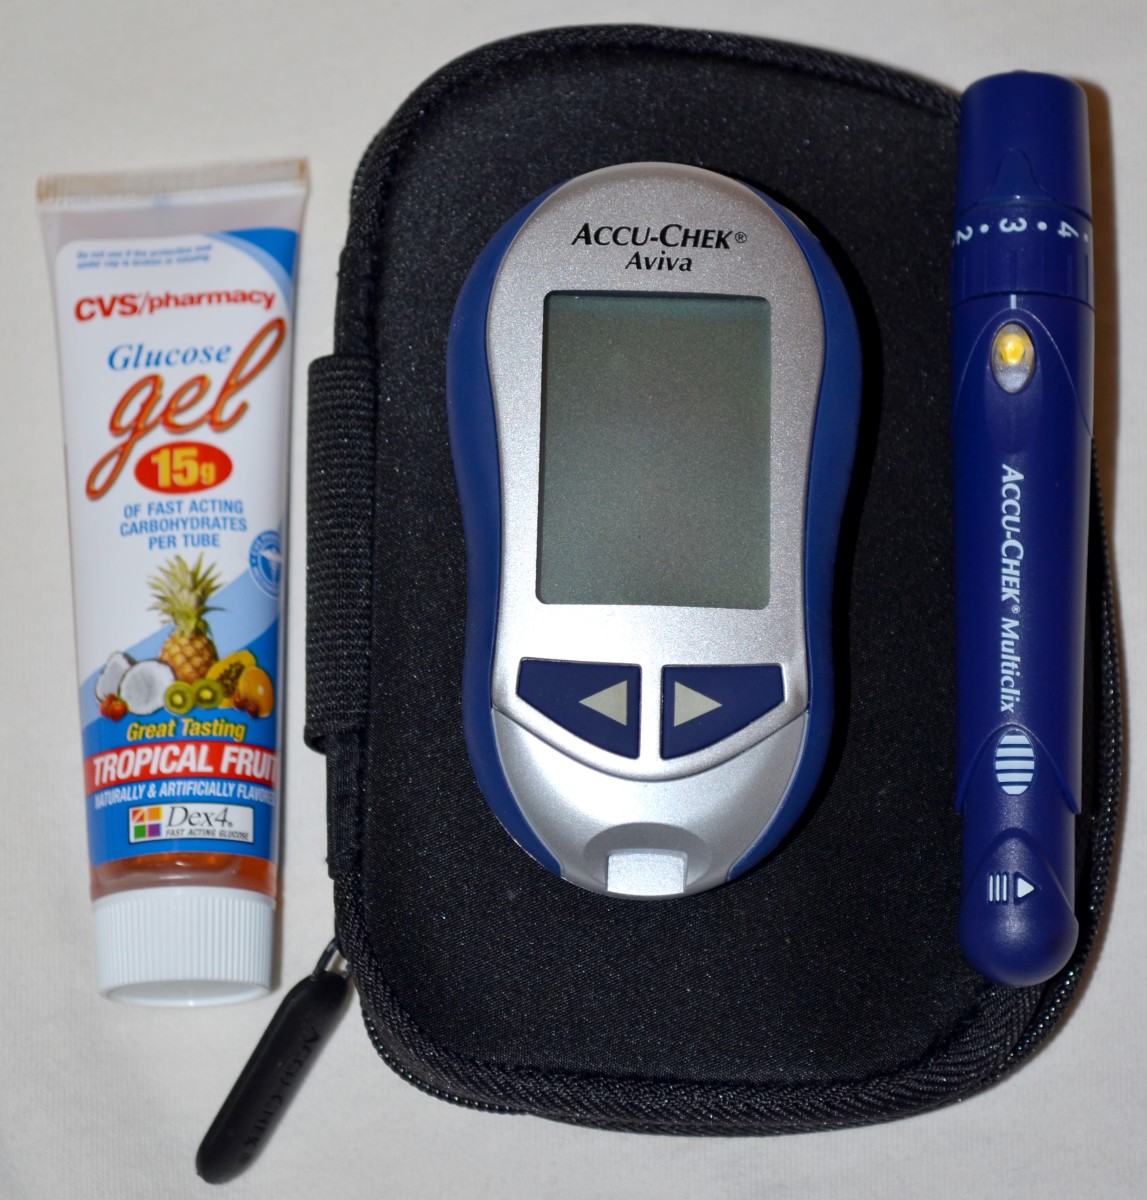 Our glucometer and a tube of glucose gel that I keep on hand, just in case.